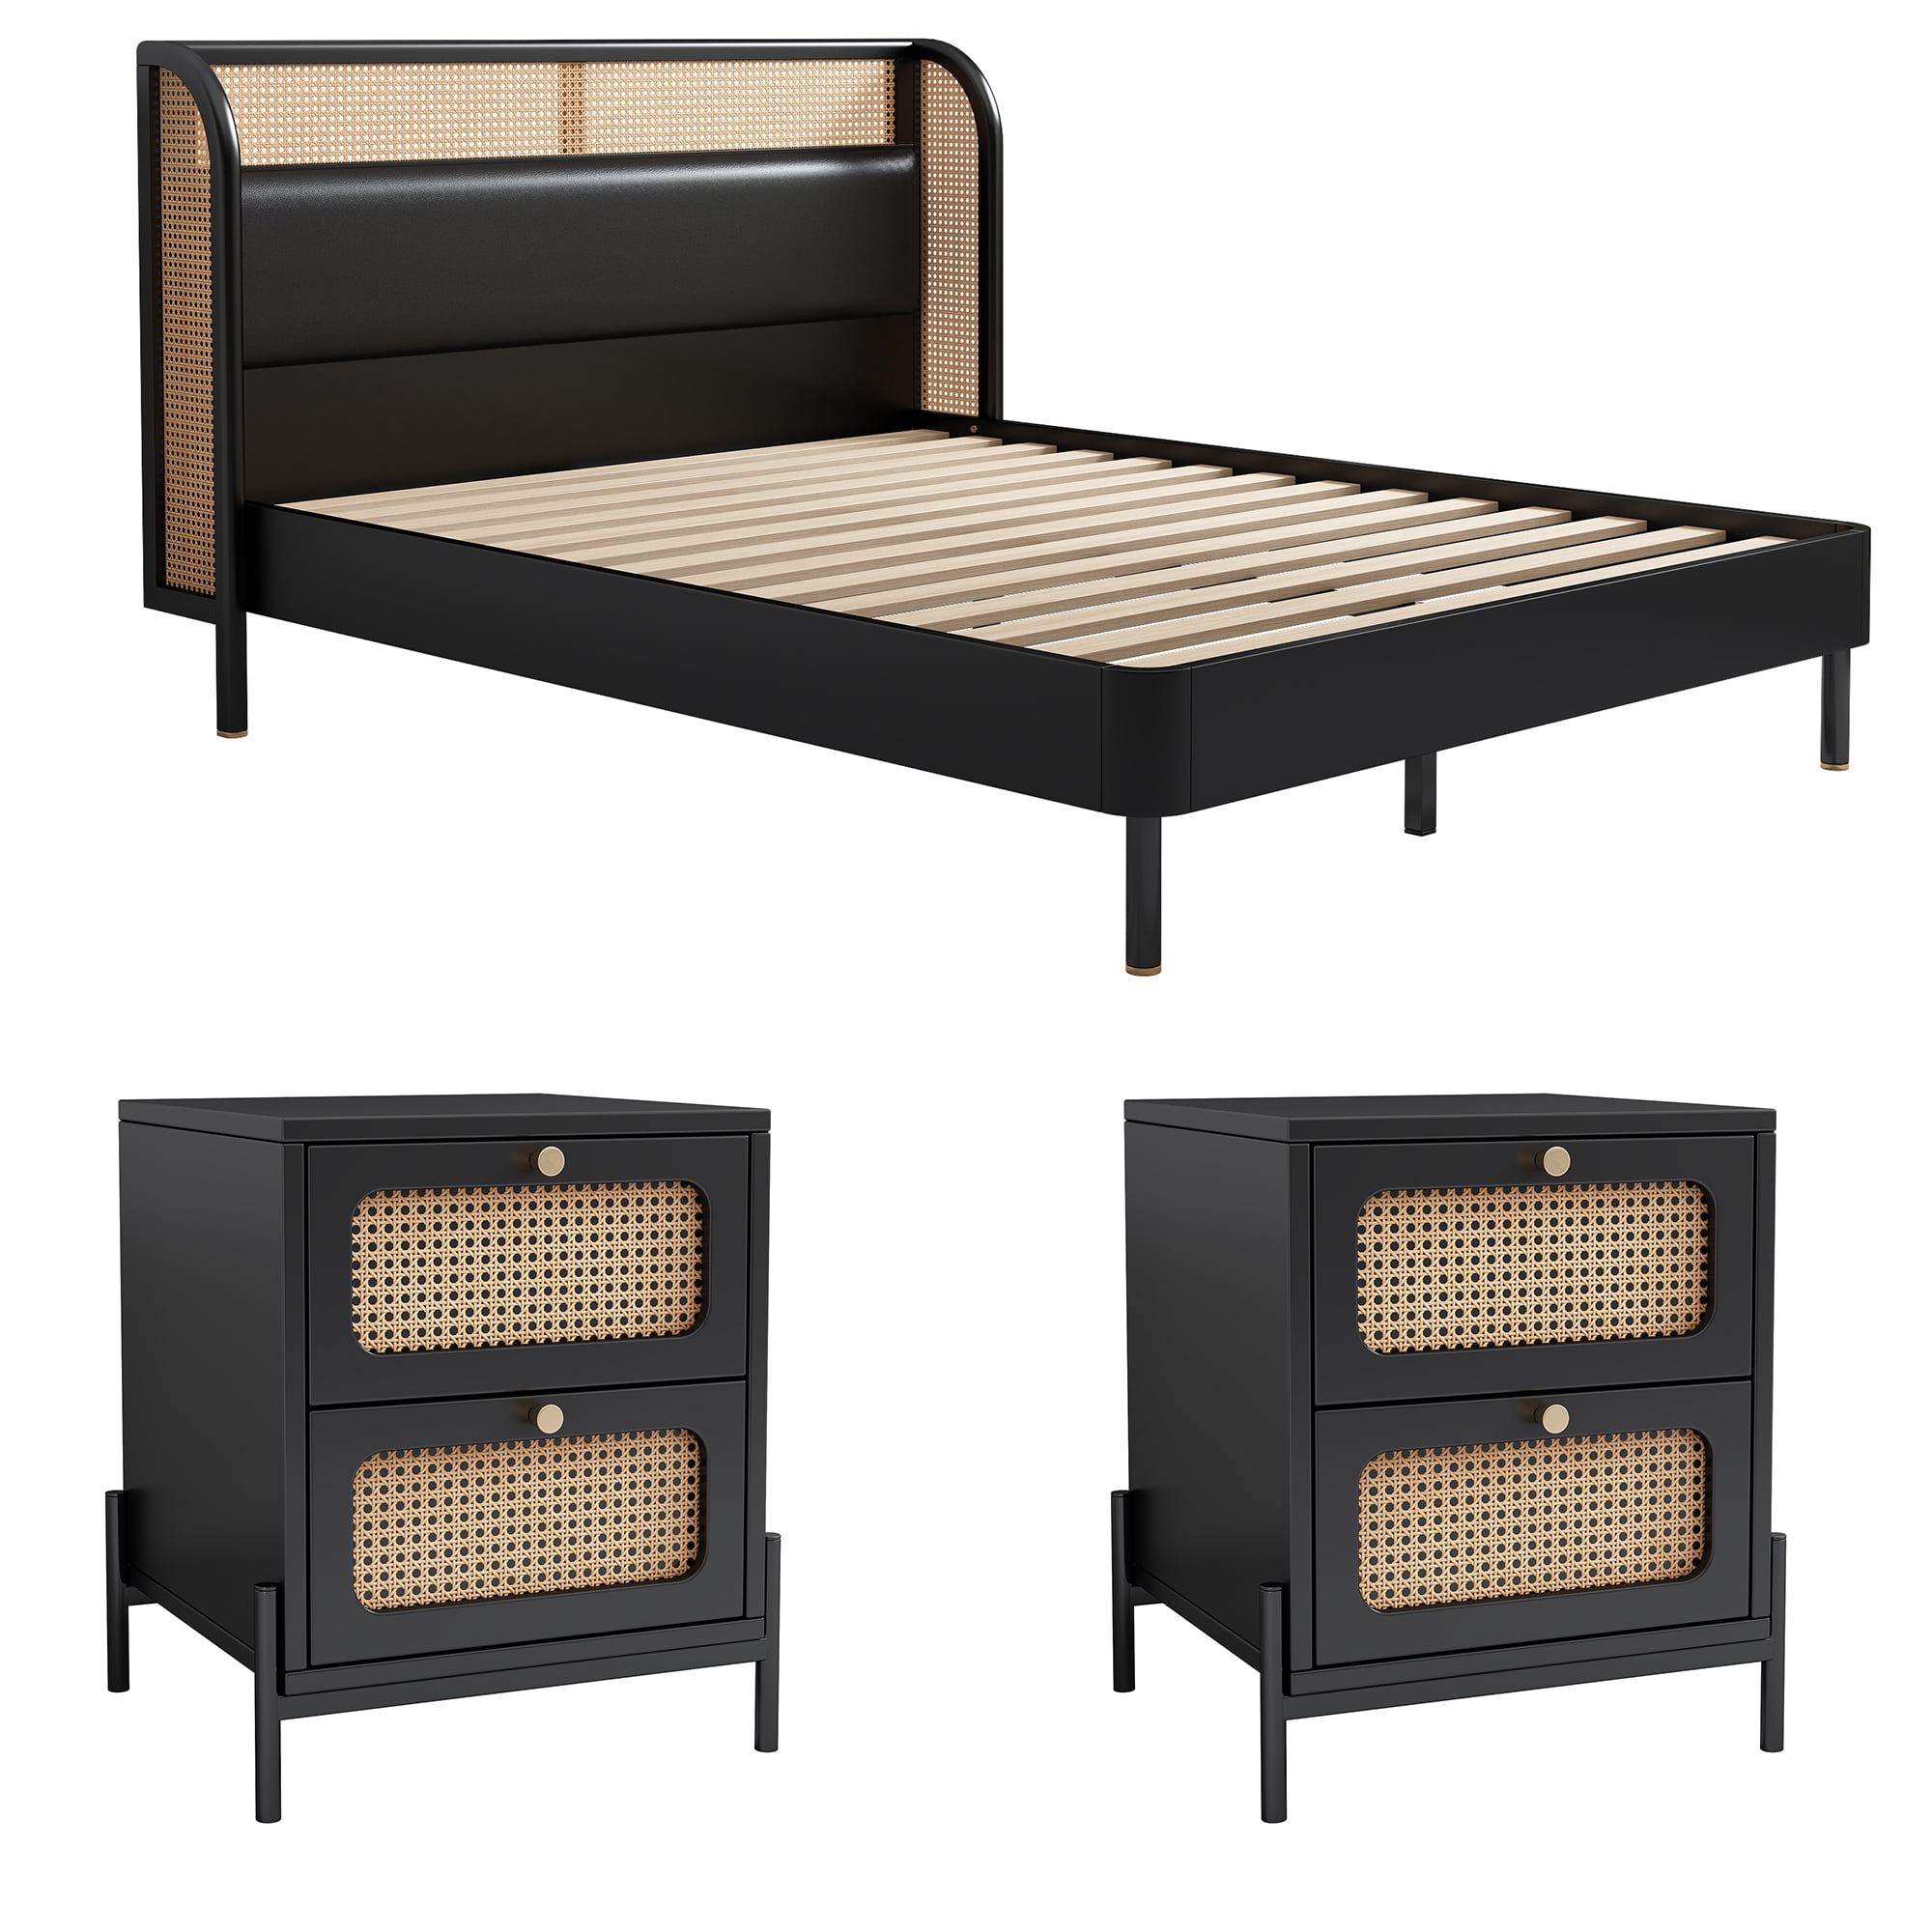 Cannage Rattan 3 Pieces Bedroom Set, Queen Bed - BS310220AAB